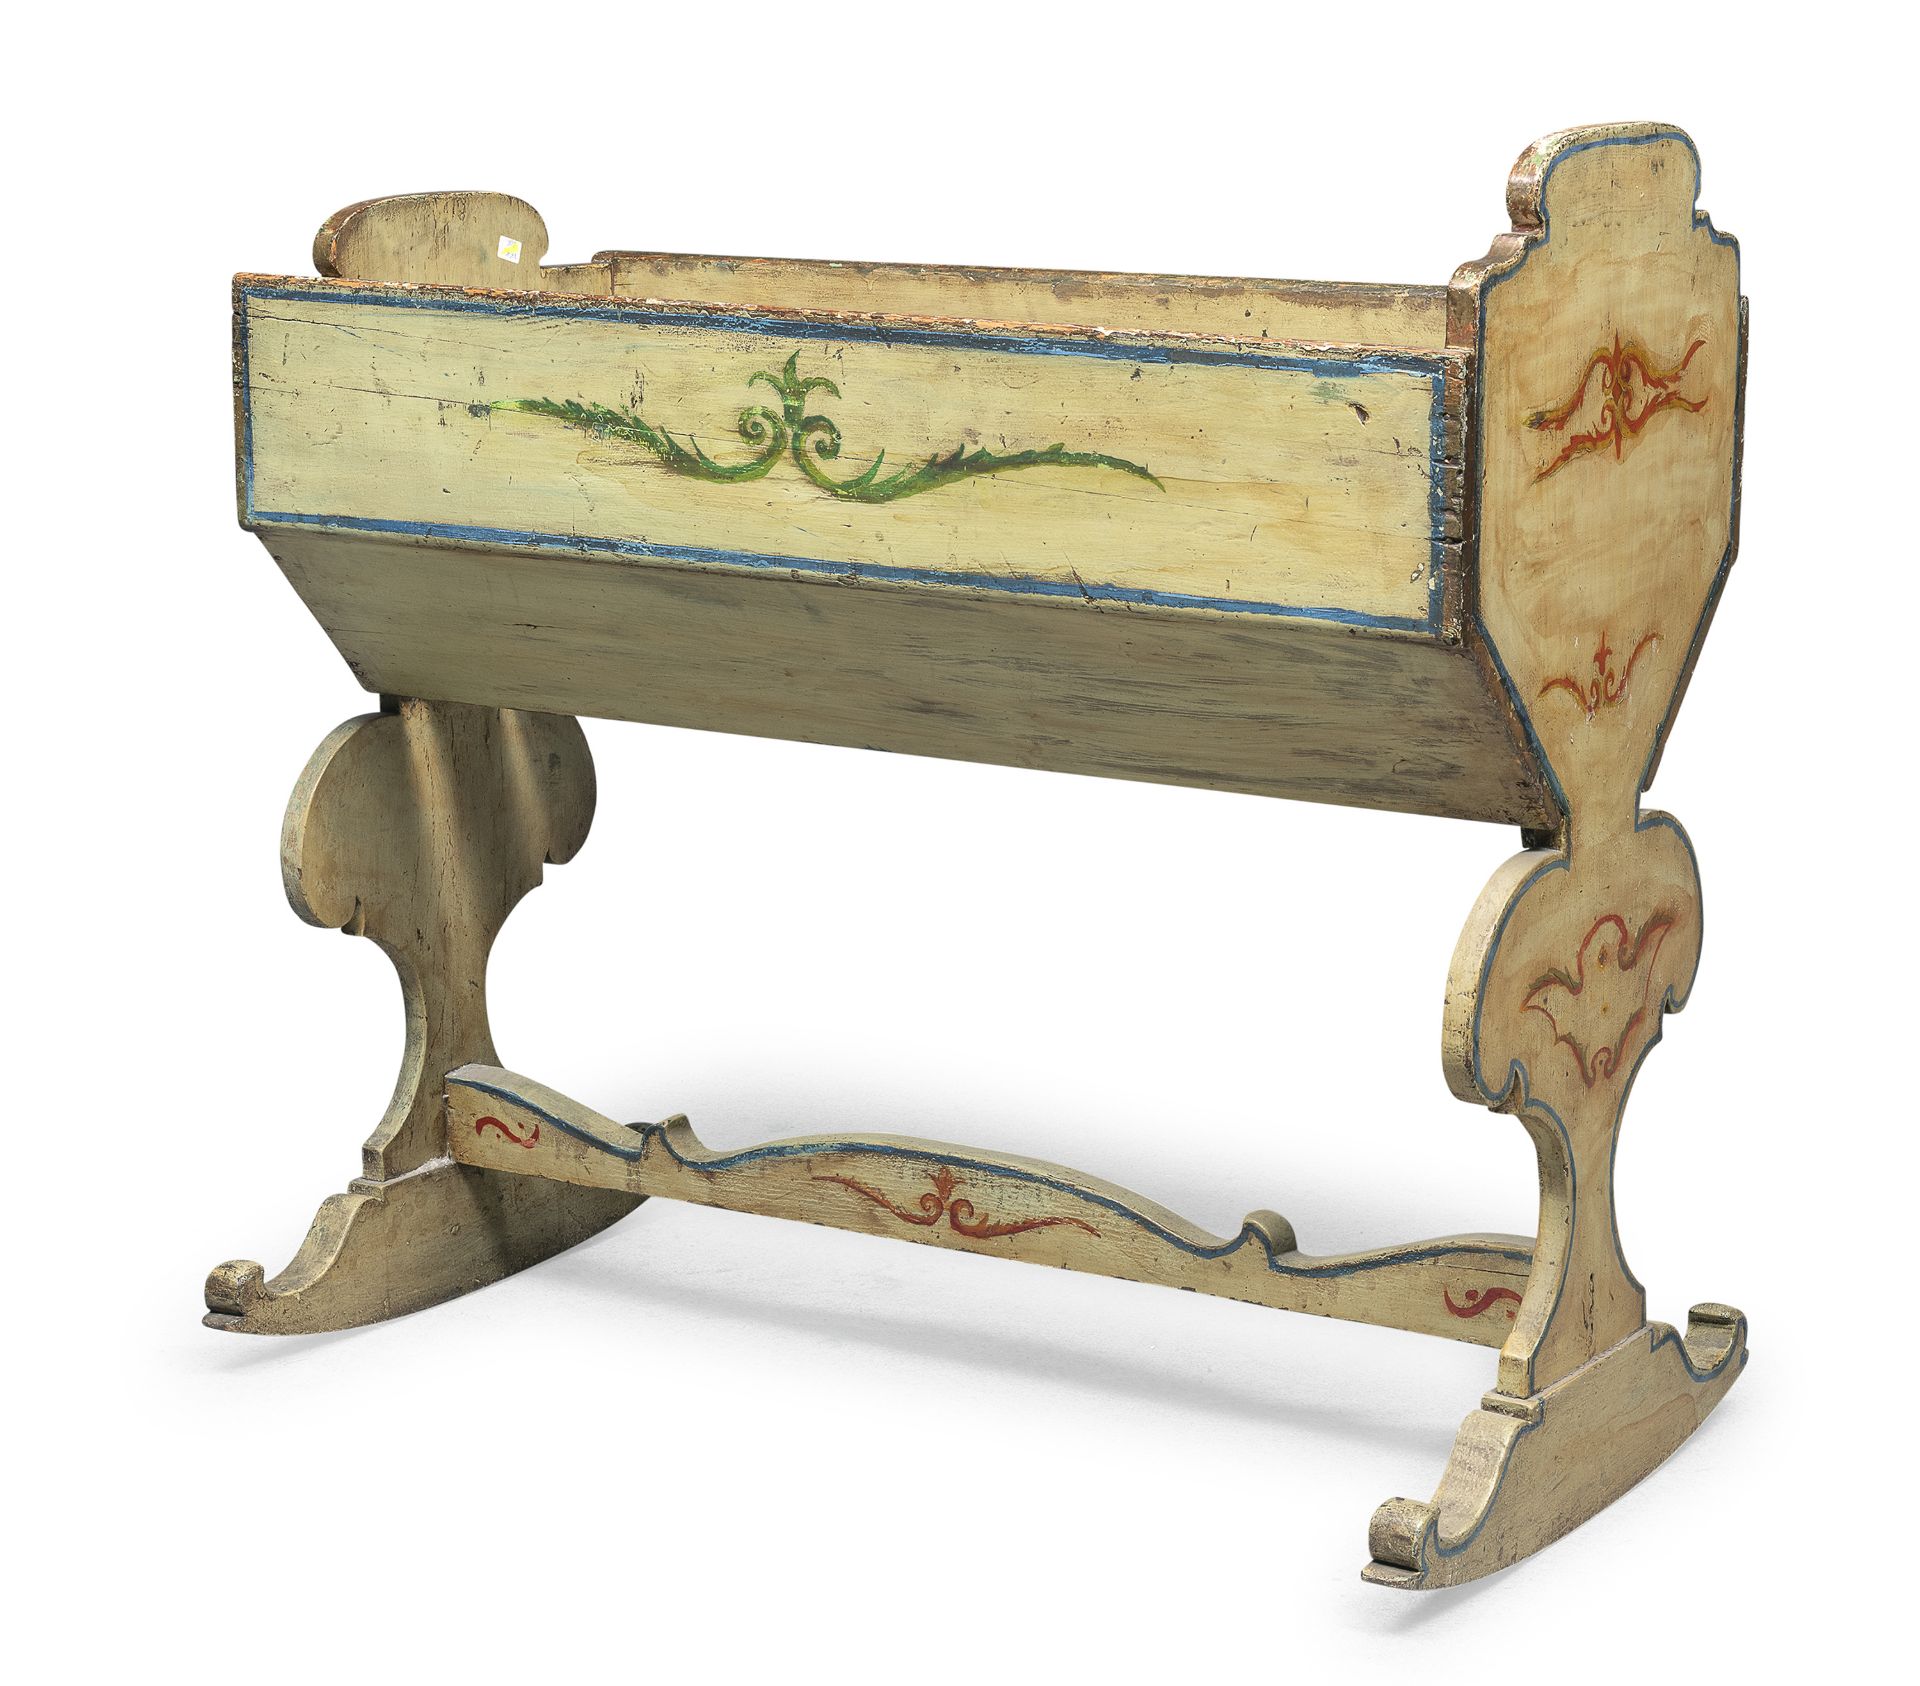 CRADLE IN LACQUERED WOOD MARCHE LATE 18th CENTURY